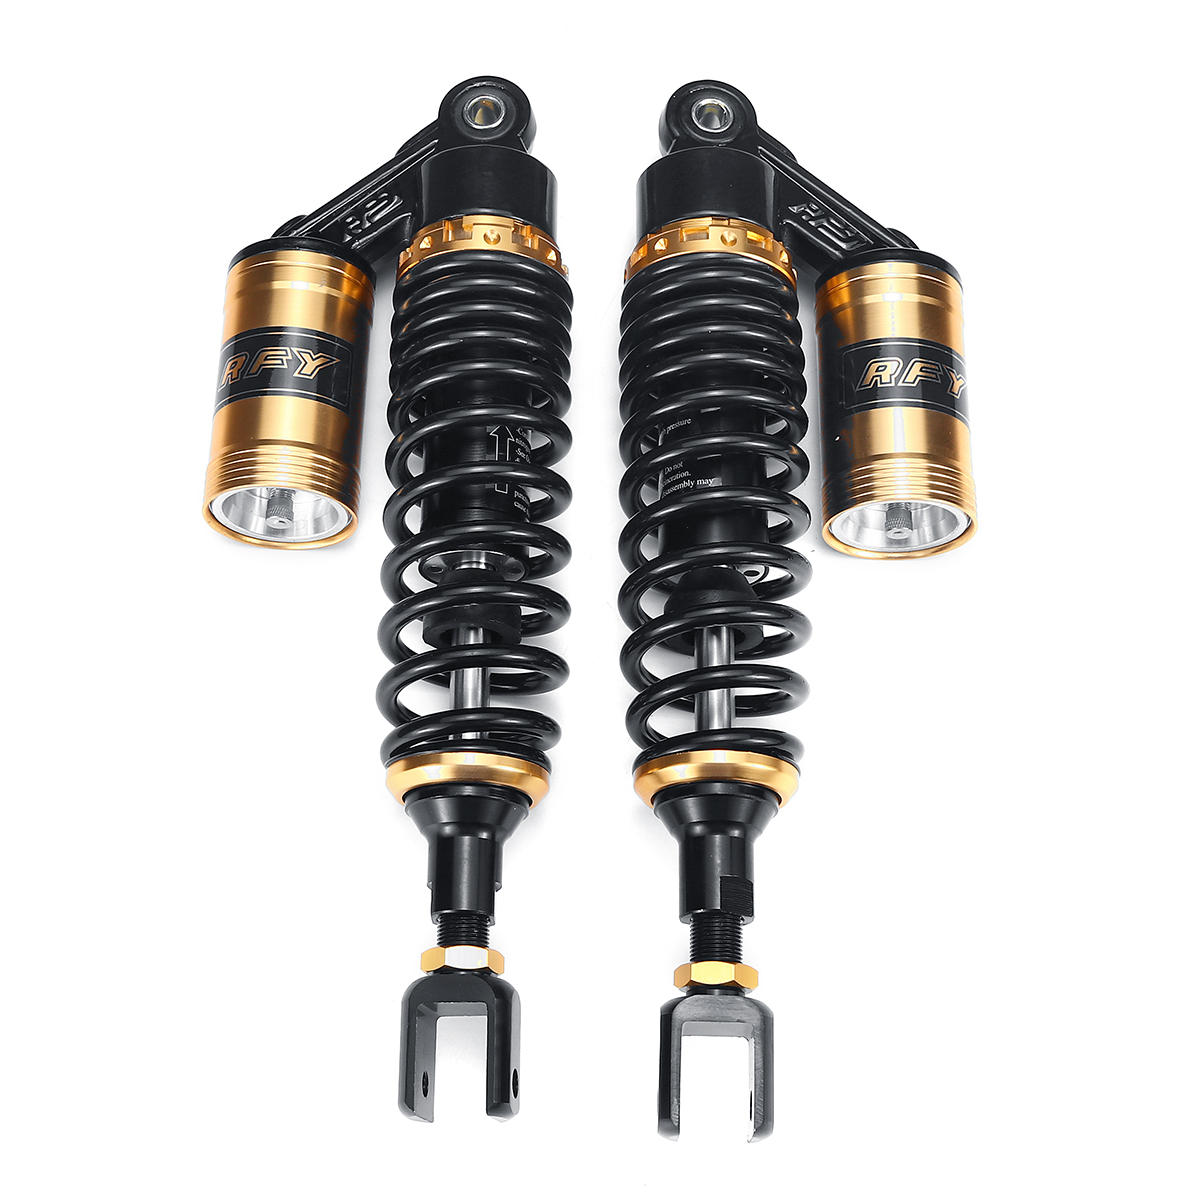 320mm 12.5/" Motorcycle Shock Absorber Scooter Rear Air Suspension For Kawasaki